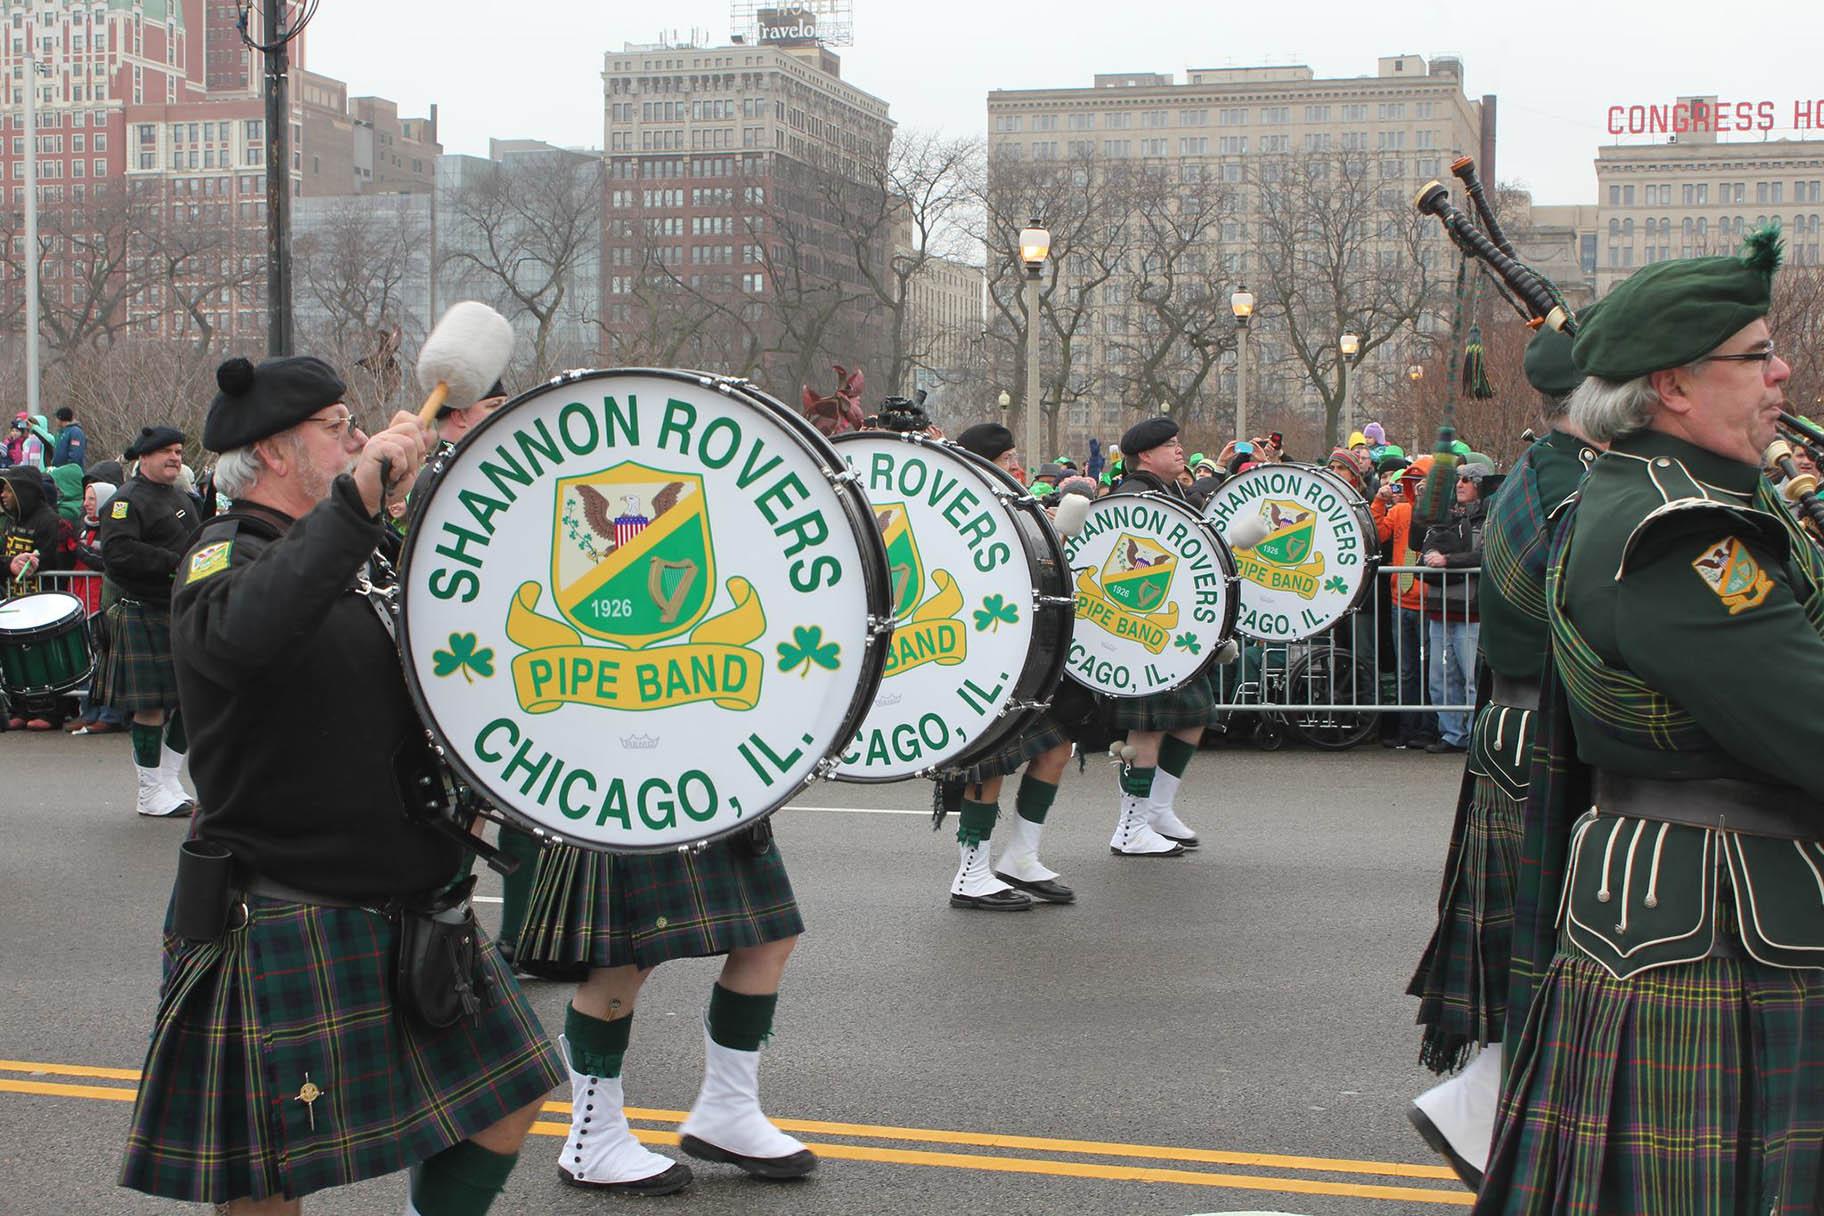 The Shannon Rovers Irish Pipe Band performs in Chicago. (Facebook photo)